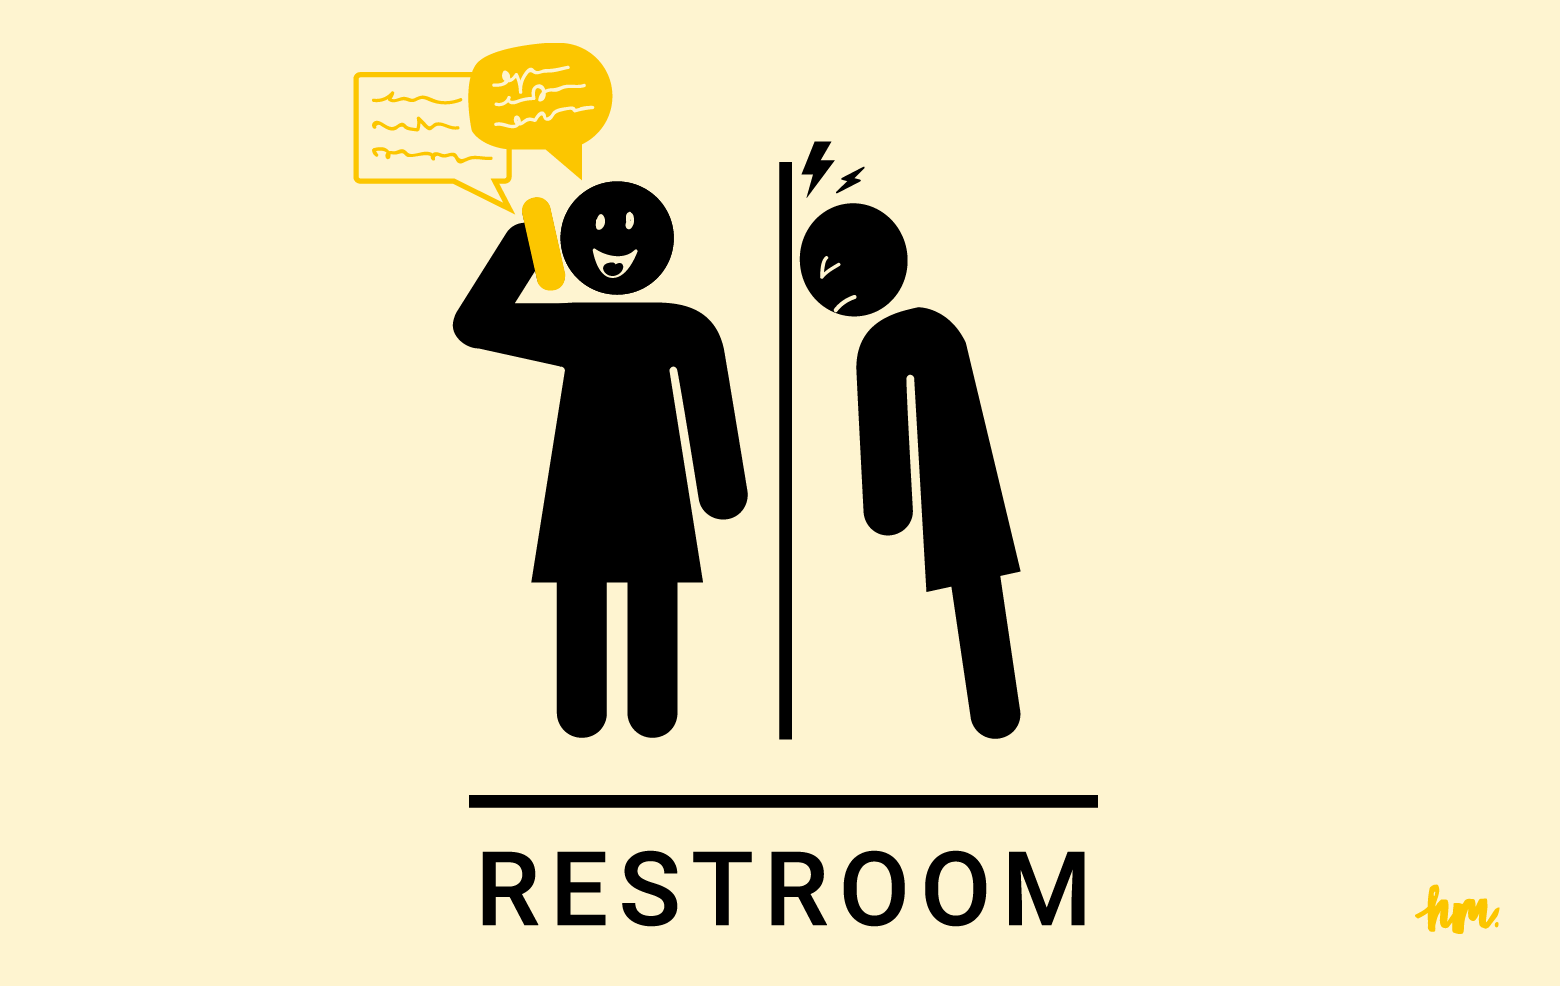 Illustration of a restroom sign with one of the female symbols chatting on a cell phone while the other female symbol bangs her head against the stall wall between them.